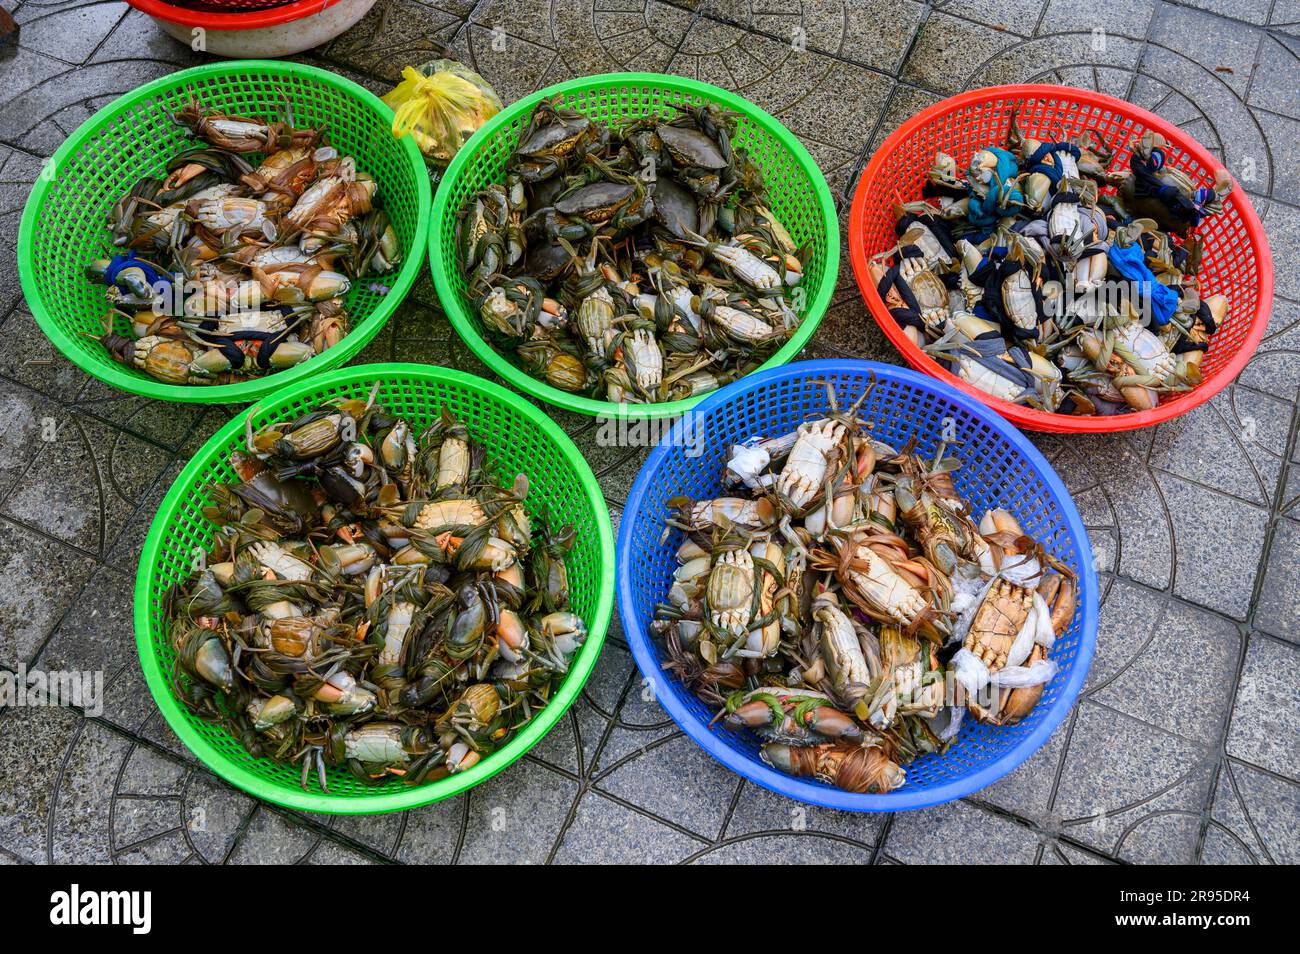 Plastic baskets containing live crabs at Hoi An Market in old town Hoi An, Vietnam. Stock Photo